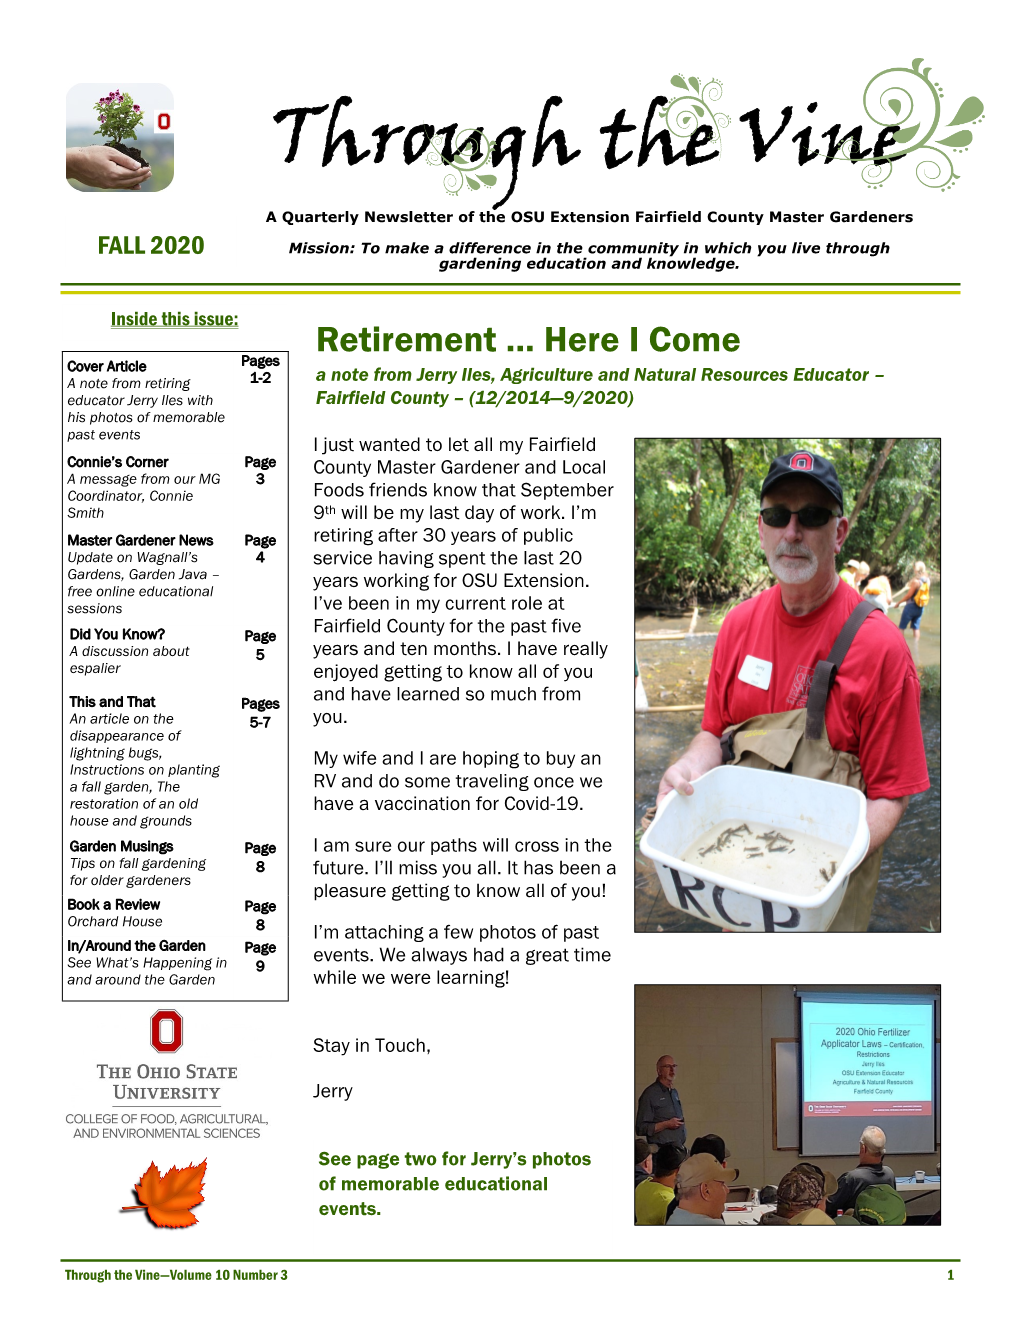 Through the Vine a Quarterly Newsletter of the OSU Extension Fairfield County Master Gardeners